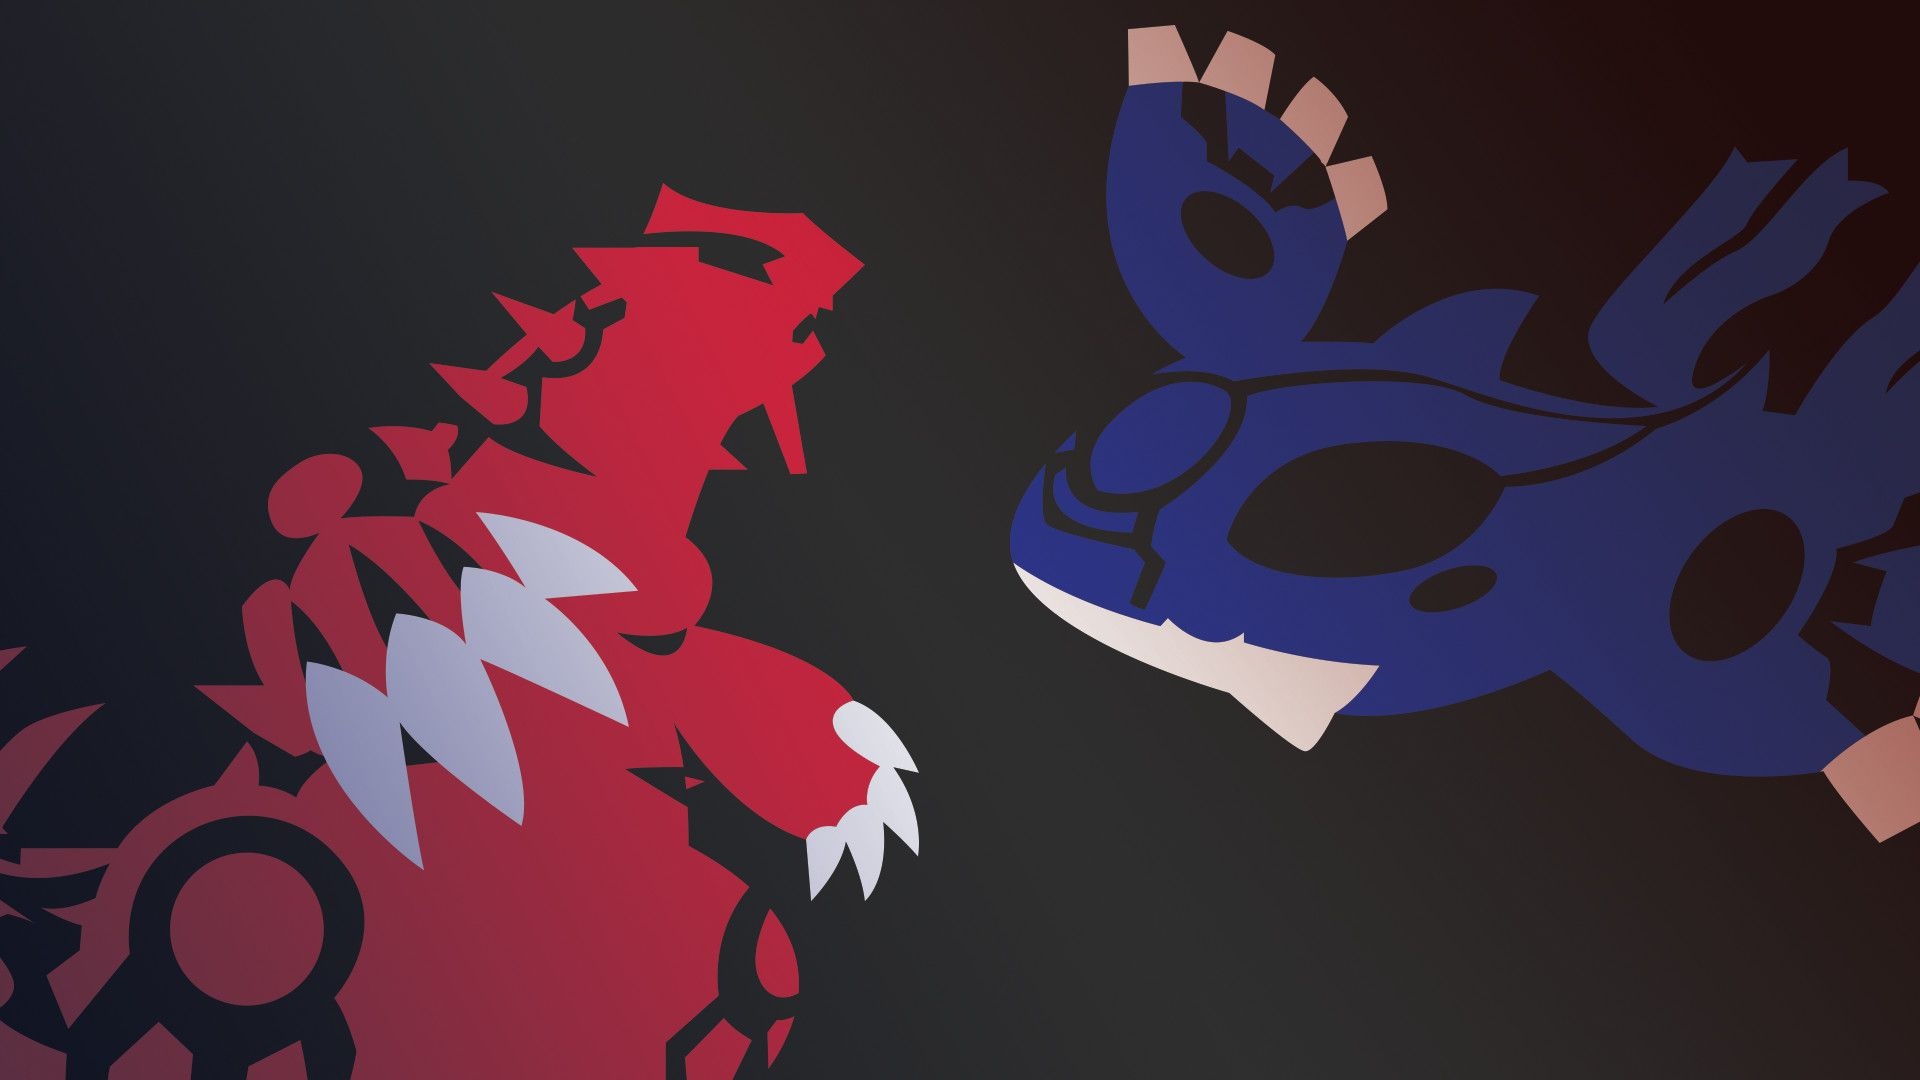 Groudon and Kyogre, a legendary duo's wallpapers, 1920x1080 Full HD Desktop